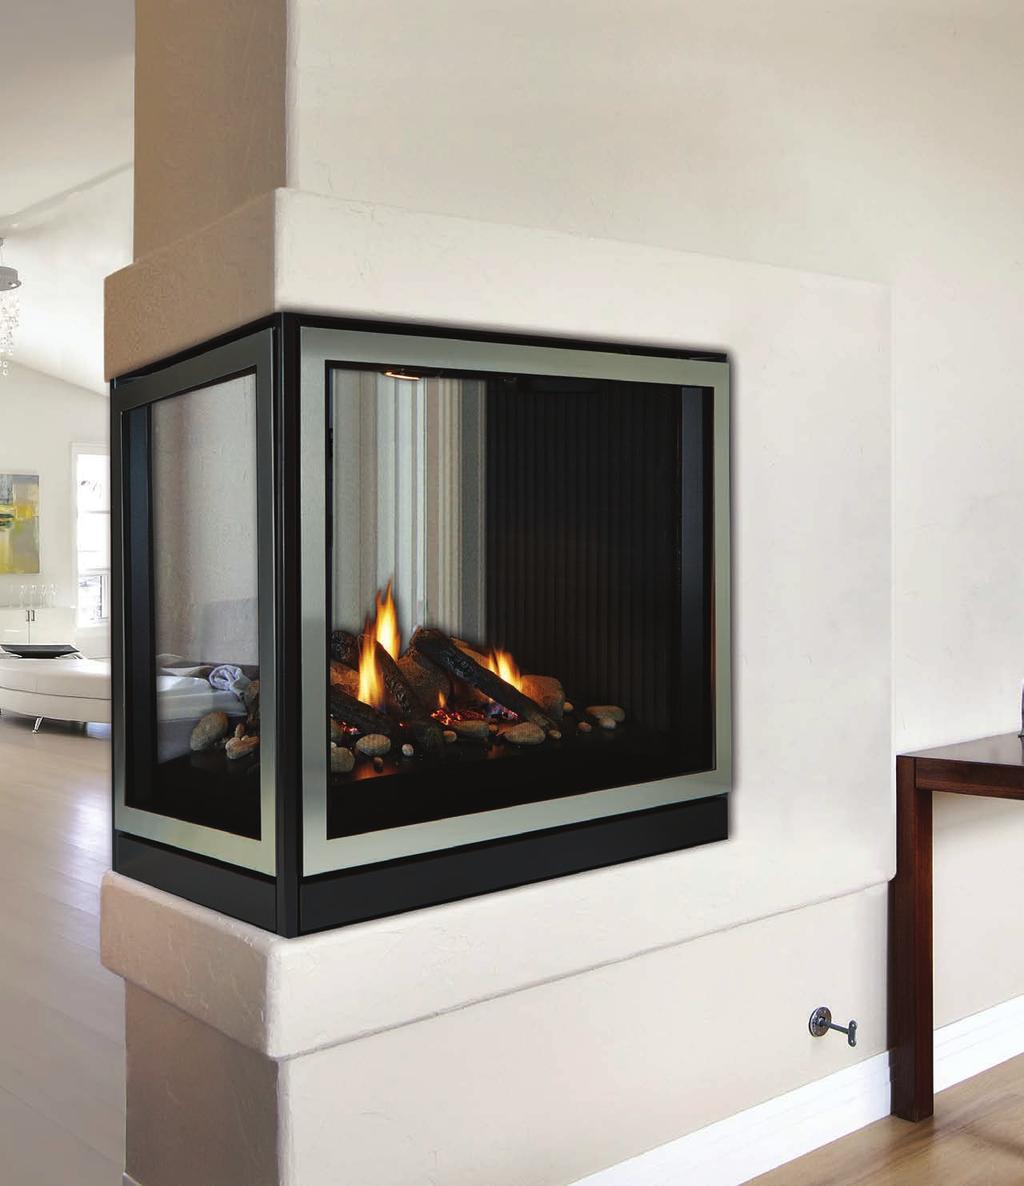 Premium lean-face Peninsula Premium lean-face Direct-ent Peninsula Fireplace, lack Fluted Liner, and Mixed